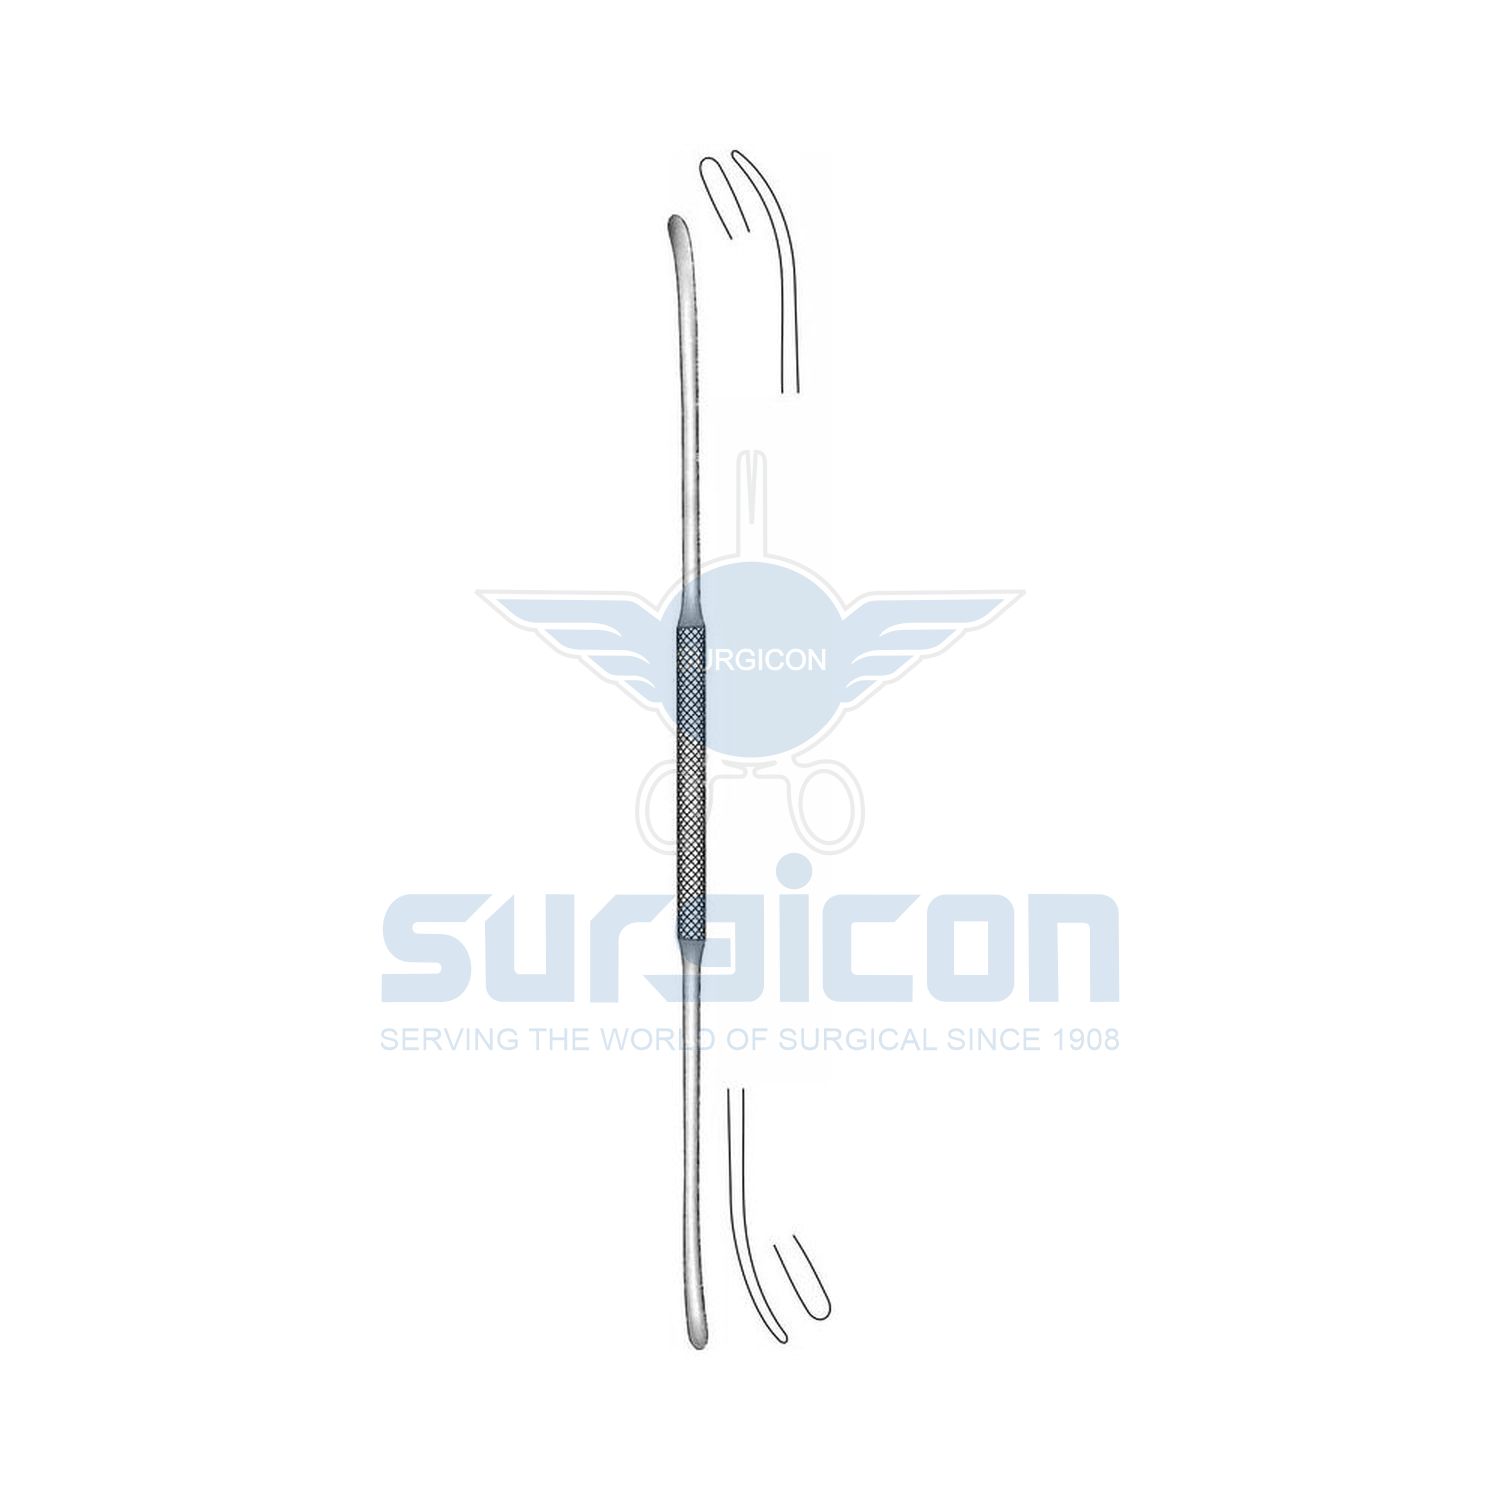 Olivecrona-Dissector-J-25-392